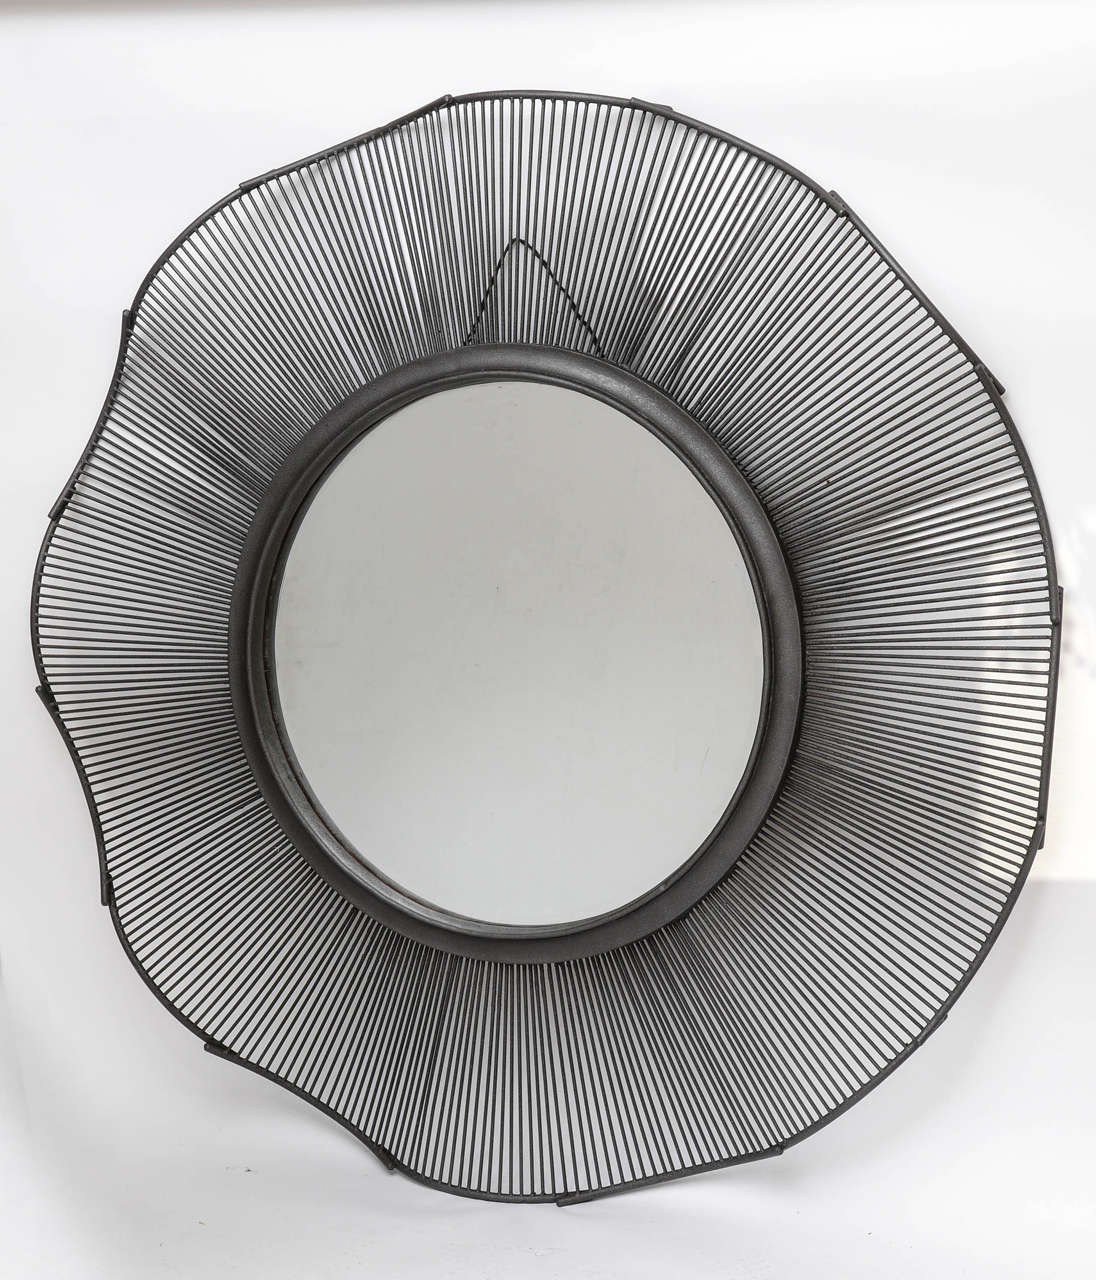 Hand-forged oversized iron center hall or entry hall mirror, in an undulating and wavy pattern, capped with a thick, interior forged surround, and an outer Brutalist style.